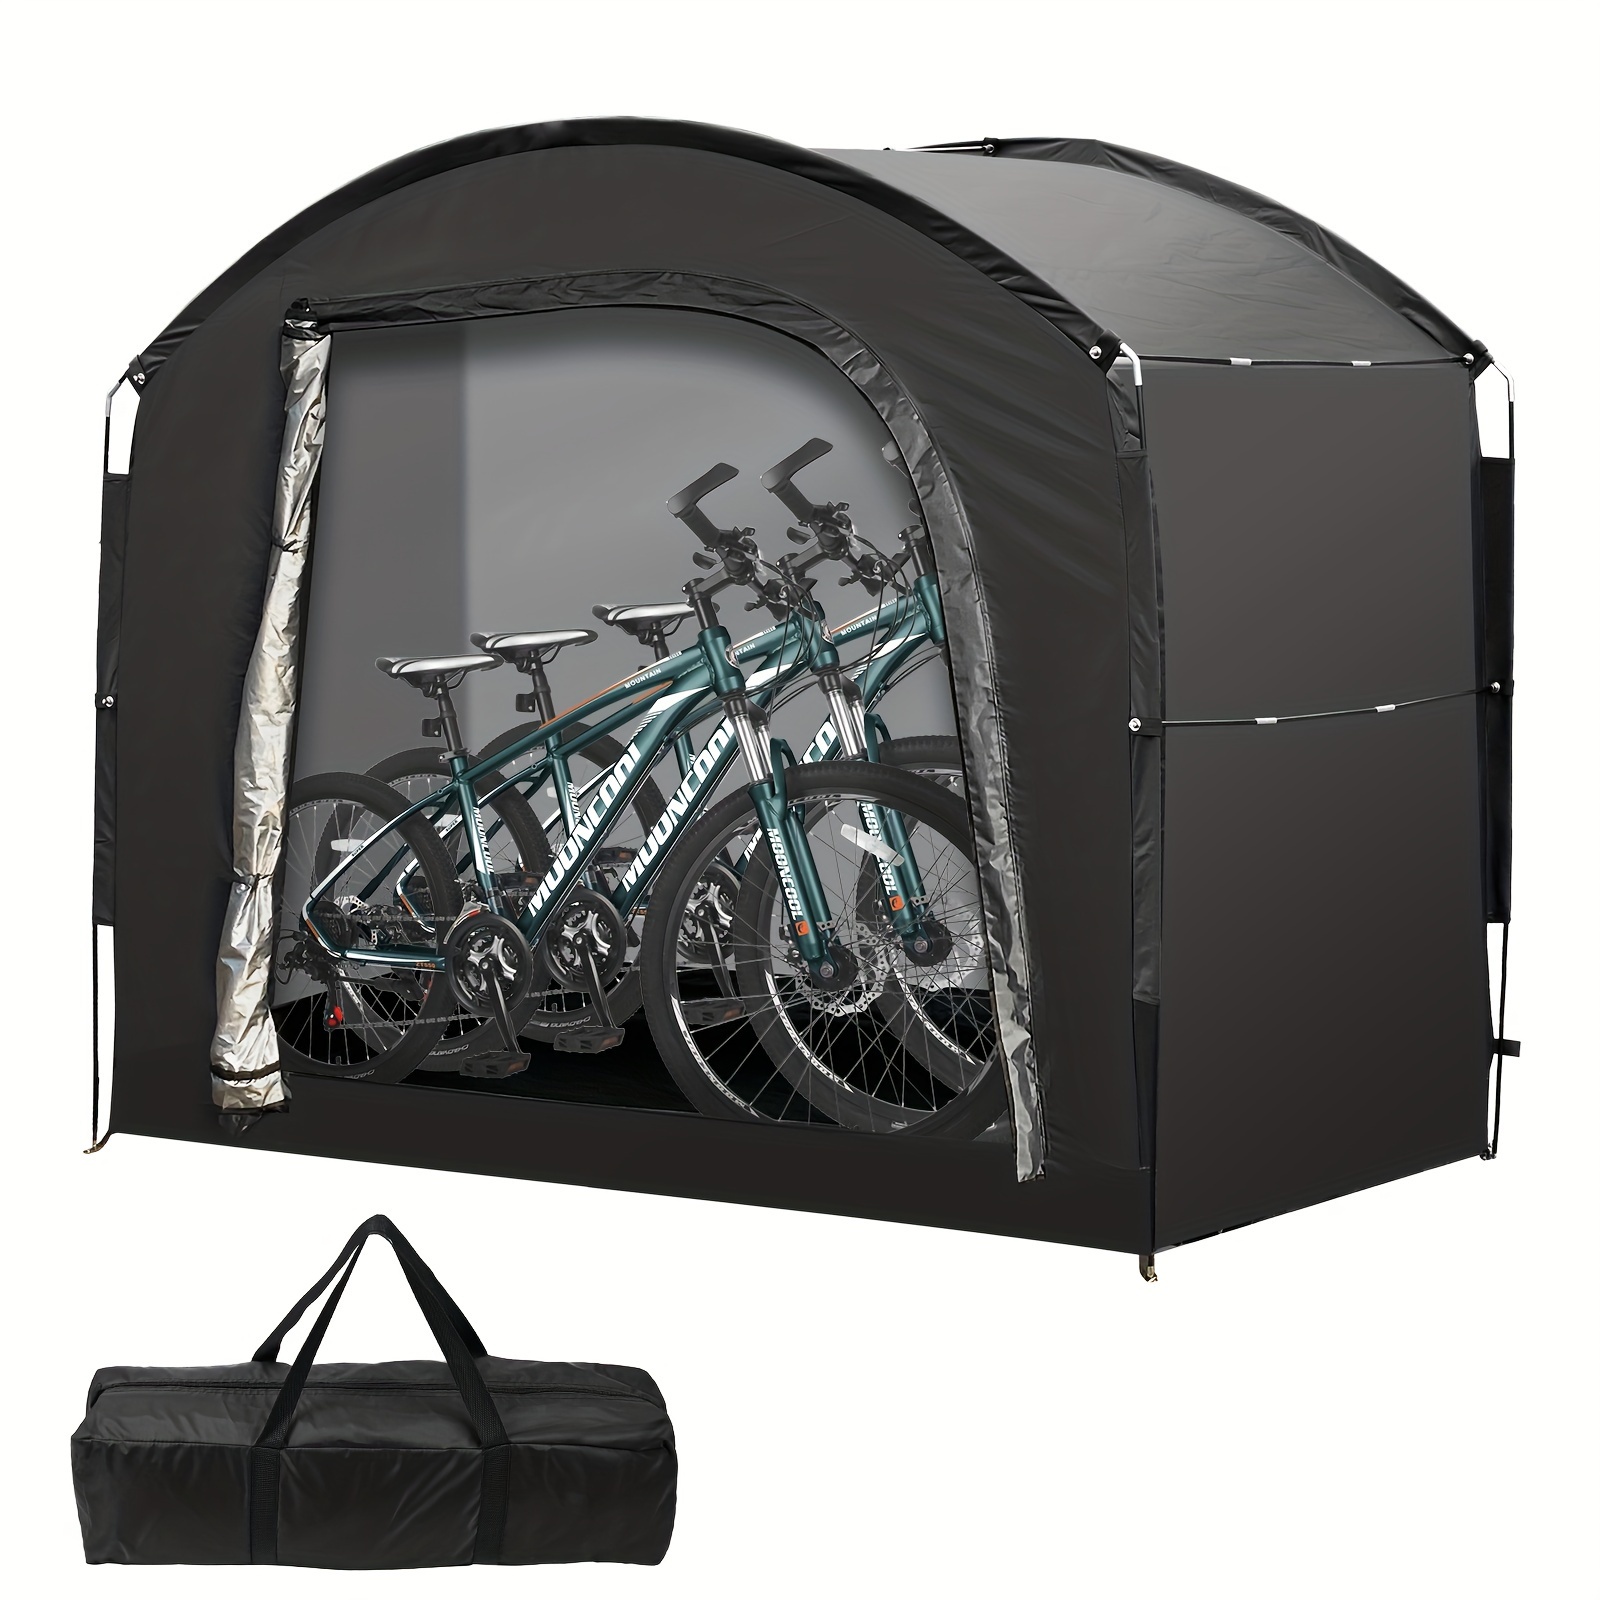 

Mophoto Bike Storage Tent, 80"x67"x48" Patio Storage Shed, Outdoor Storage Cover For Over 3 Bicycles Lawn Mower Garden Tools, Waterproof Bike Storage Tent Shelter